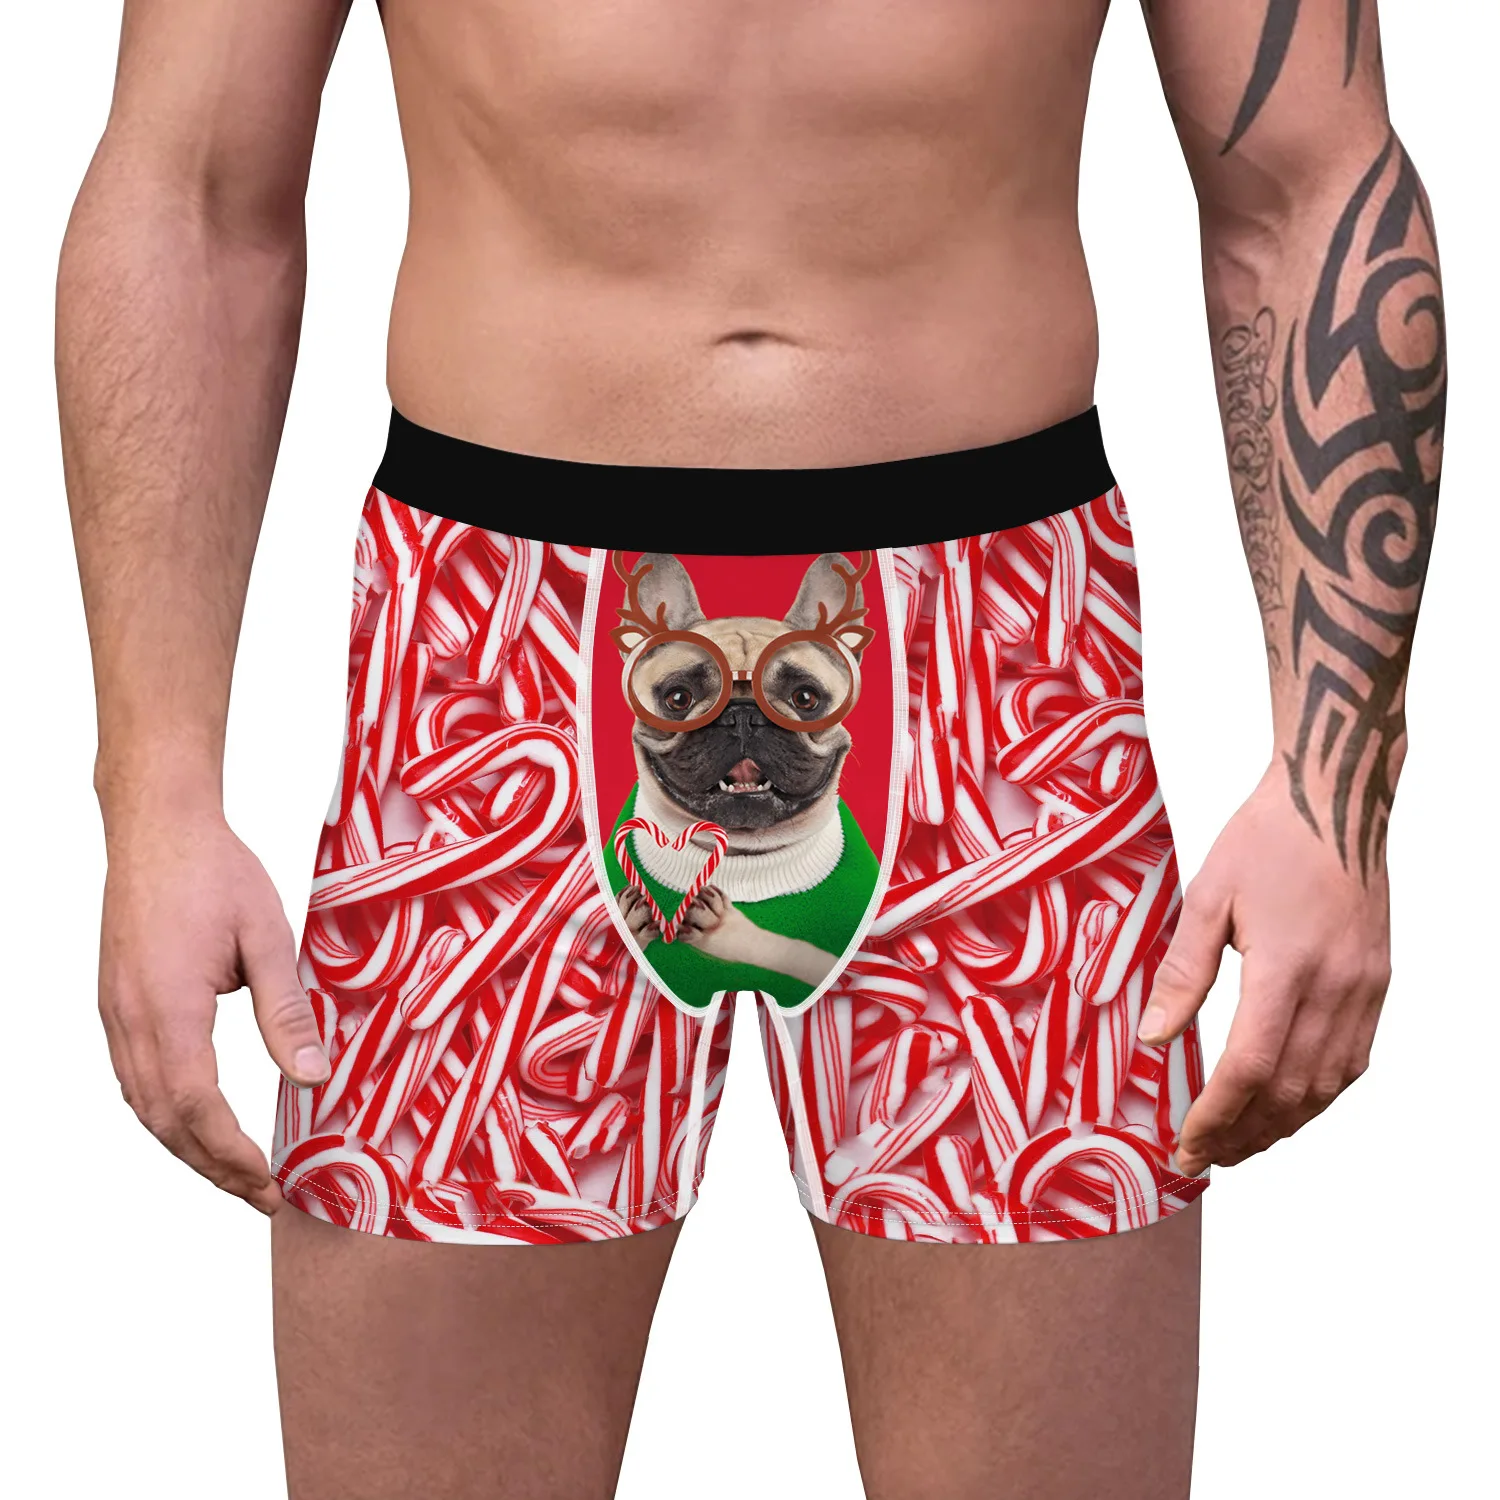 Humorous Underwear Gag Gifts for Men Lazy One Funny Boxers Novelty Boxer Shorts 